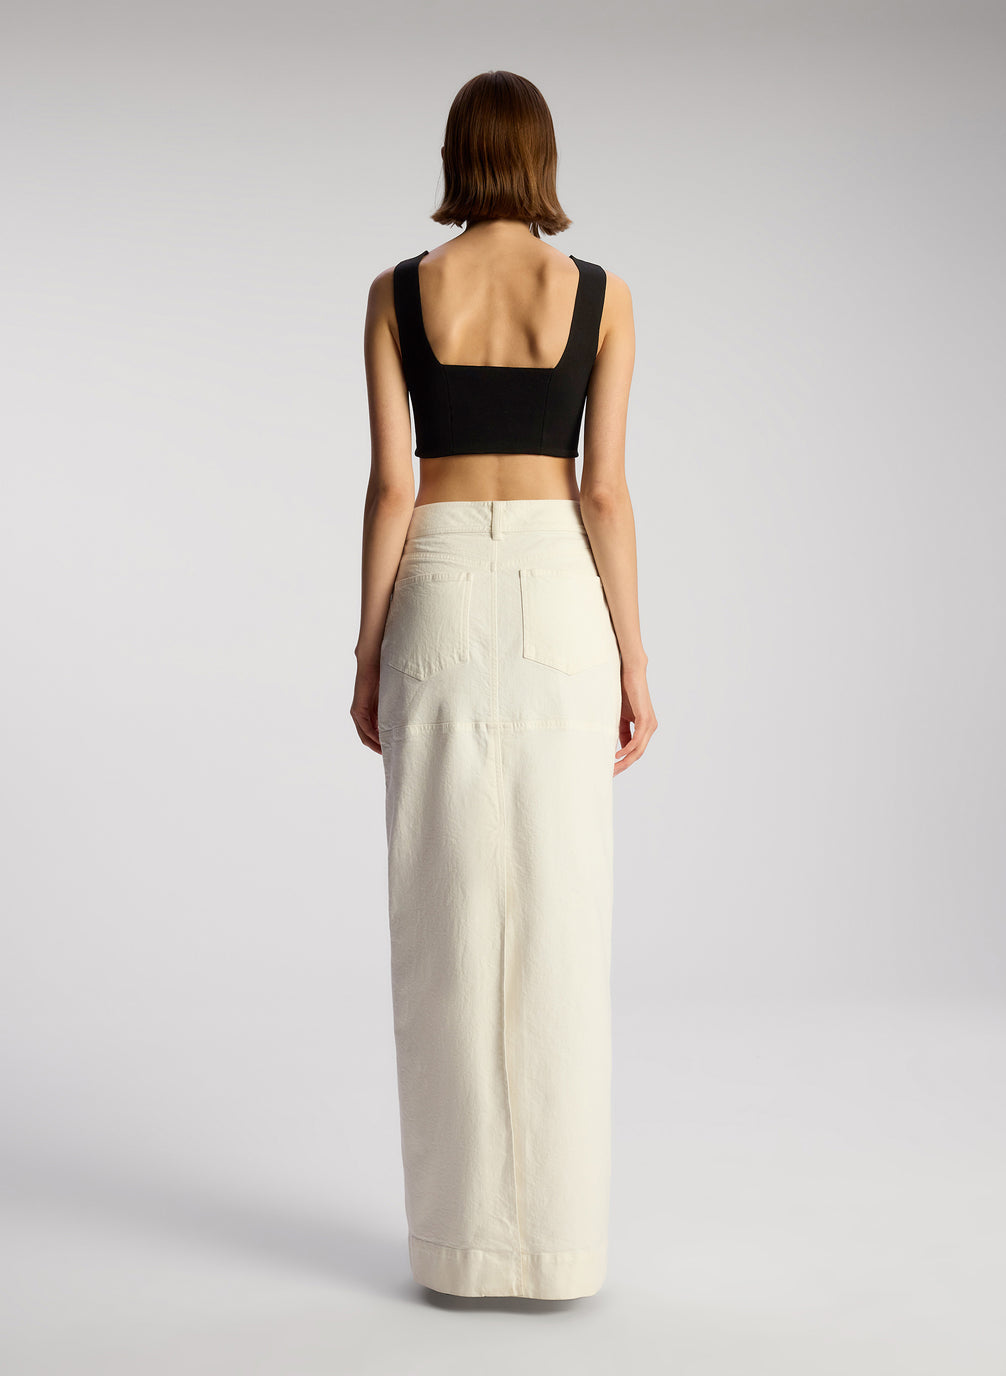 back view of woman wearing black cropped knit tank and white maxi skirt